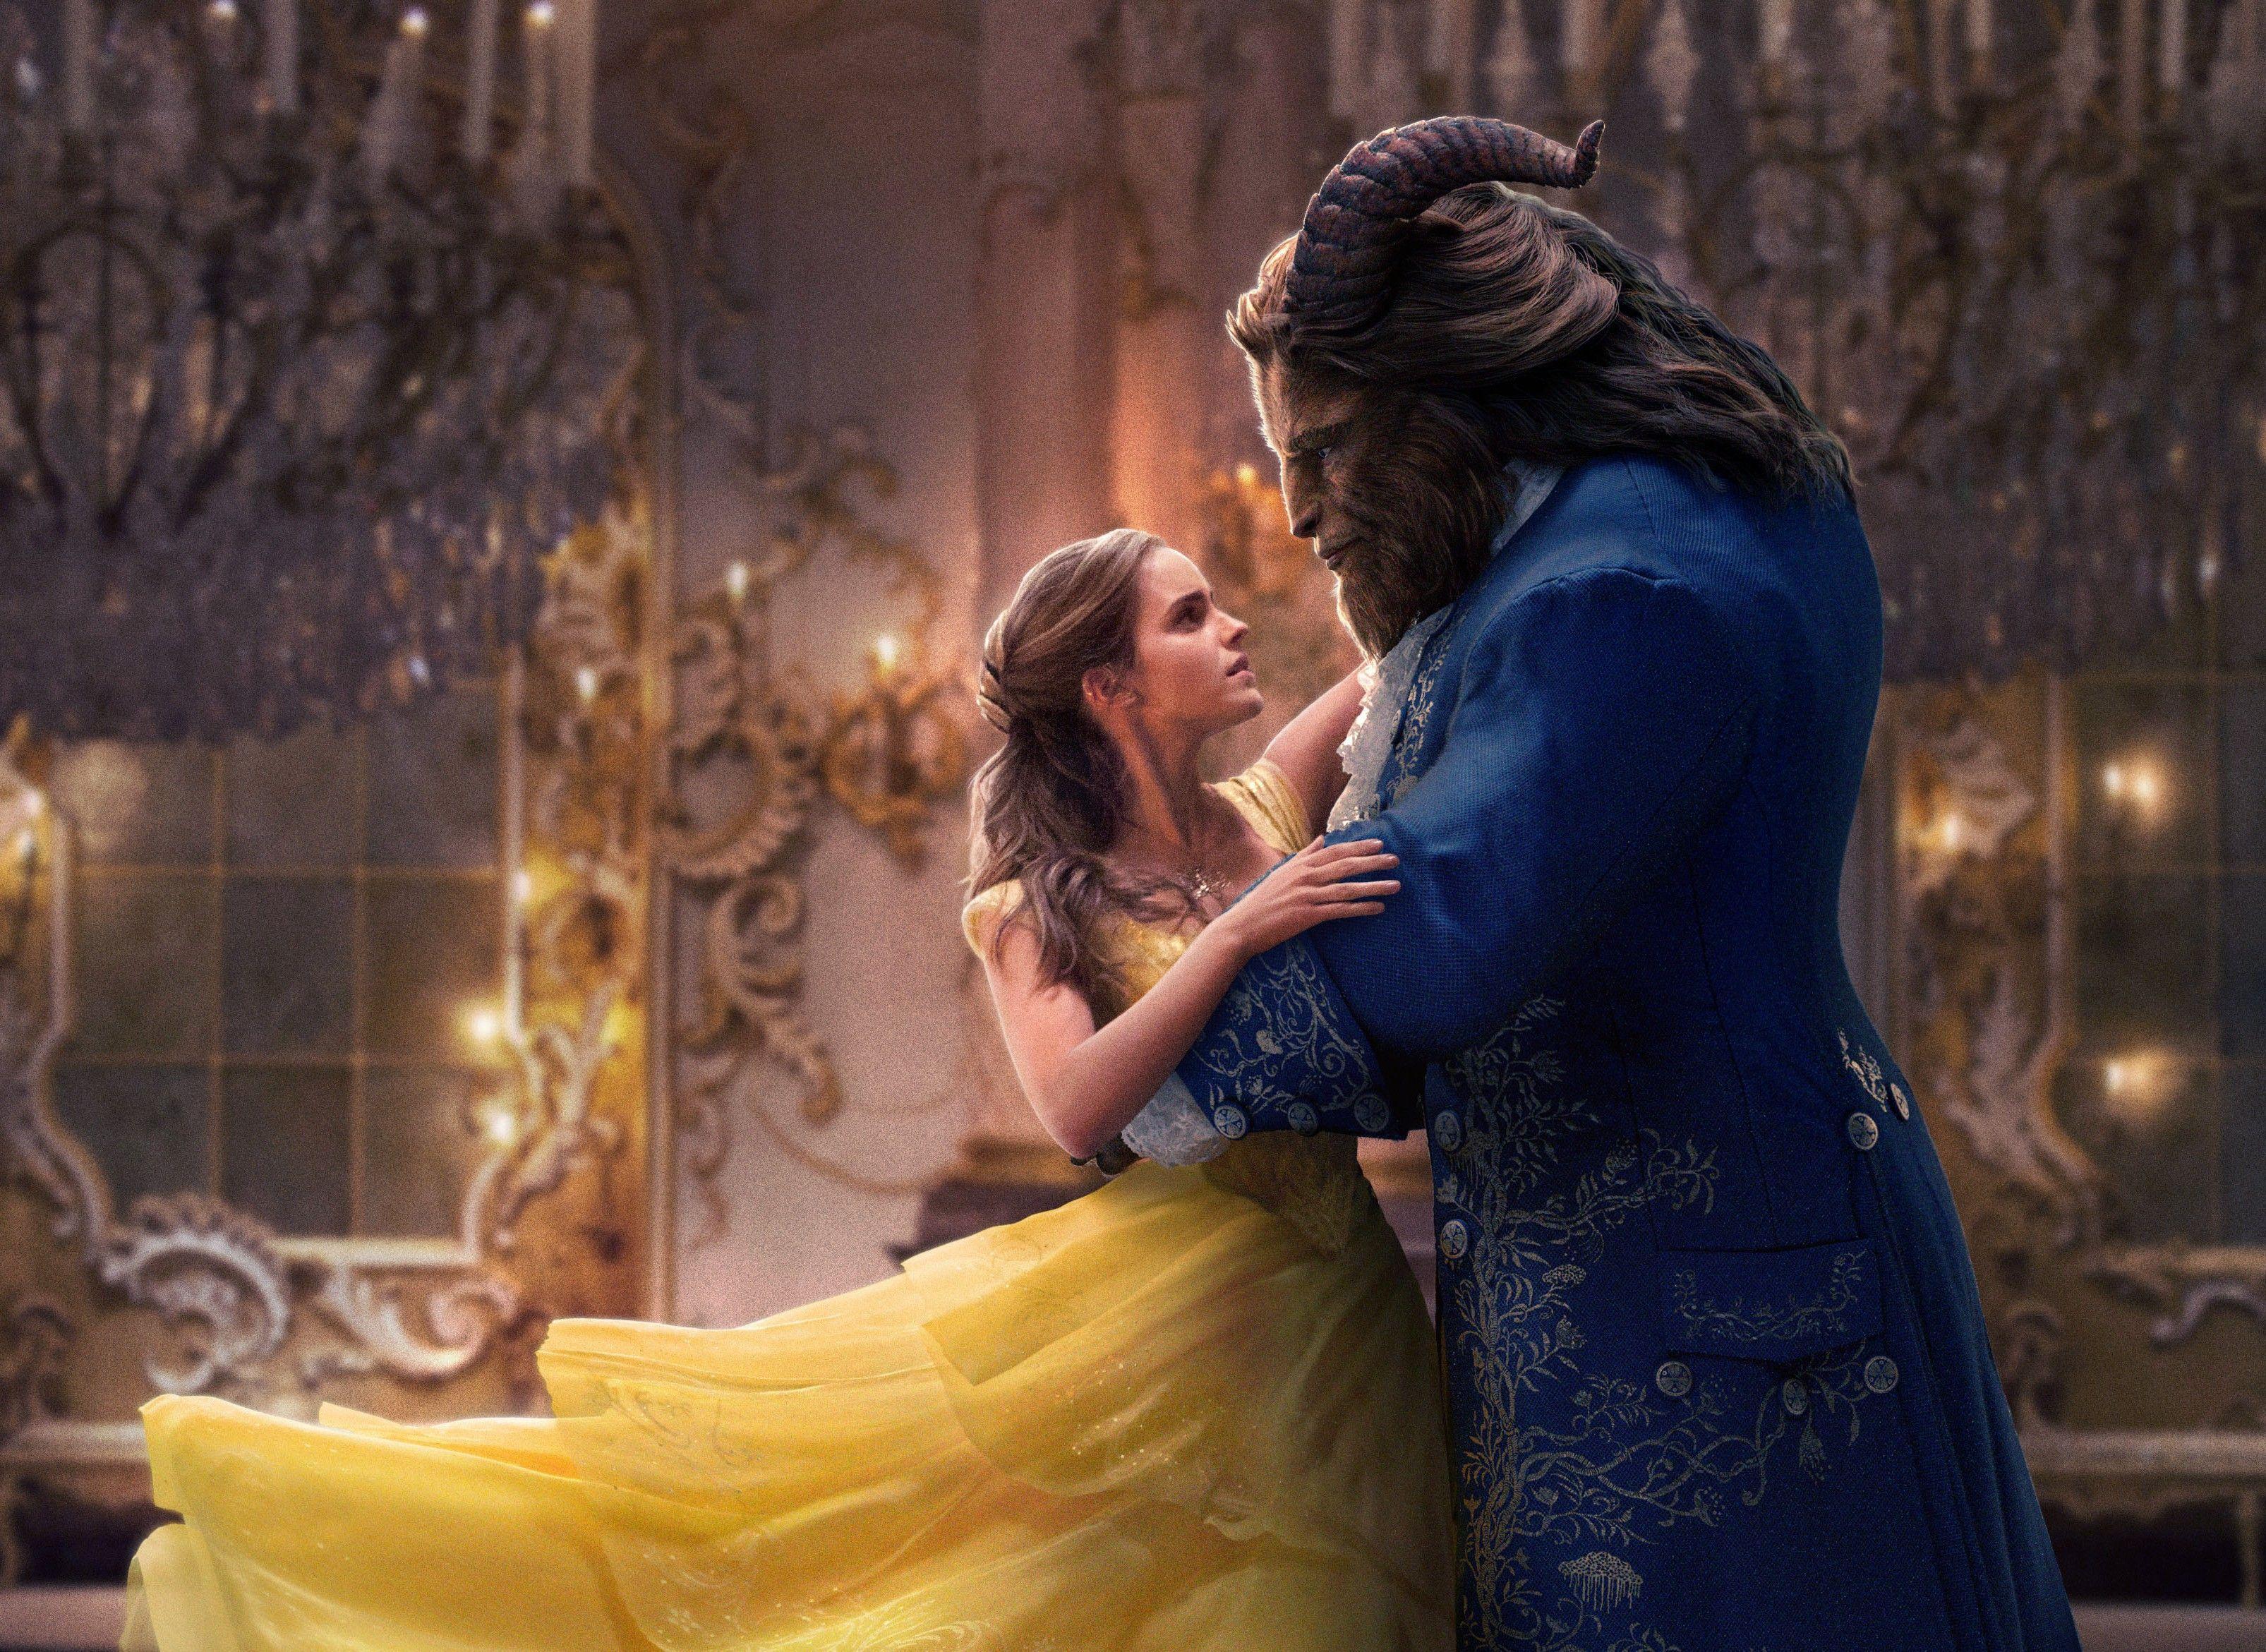 Beauty And The Beast 2017 HD Wallpapers - Wallpaper Cave